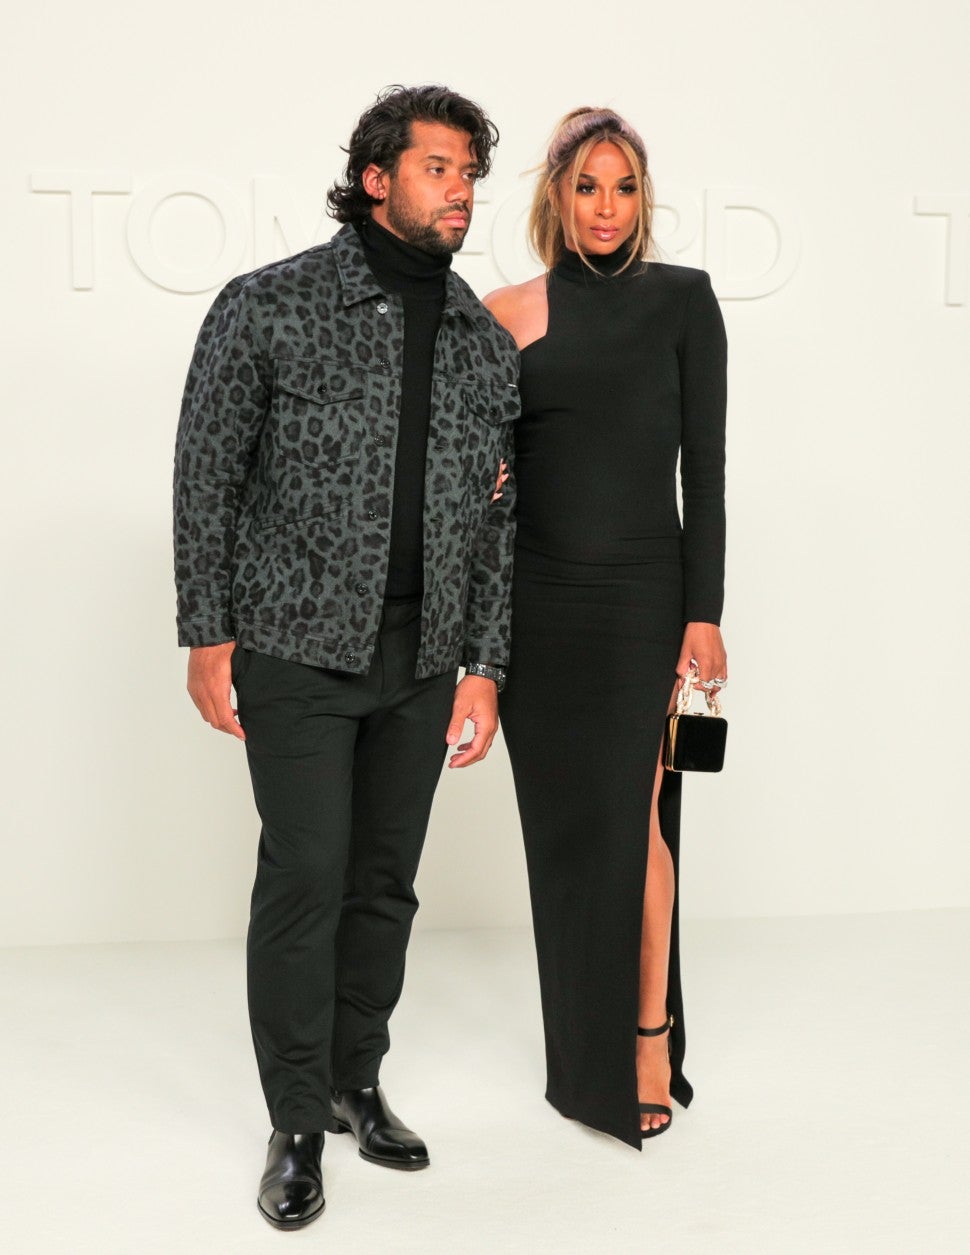 Russell Wilson and Ciara at Tom Ford F/W 2020 fashion show